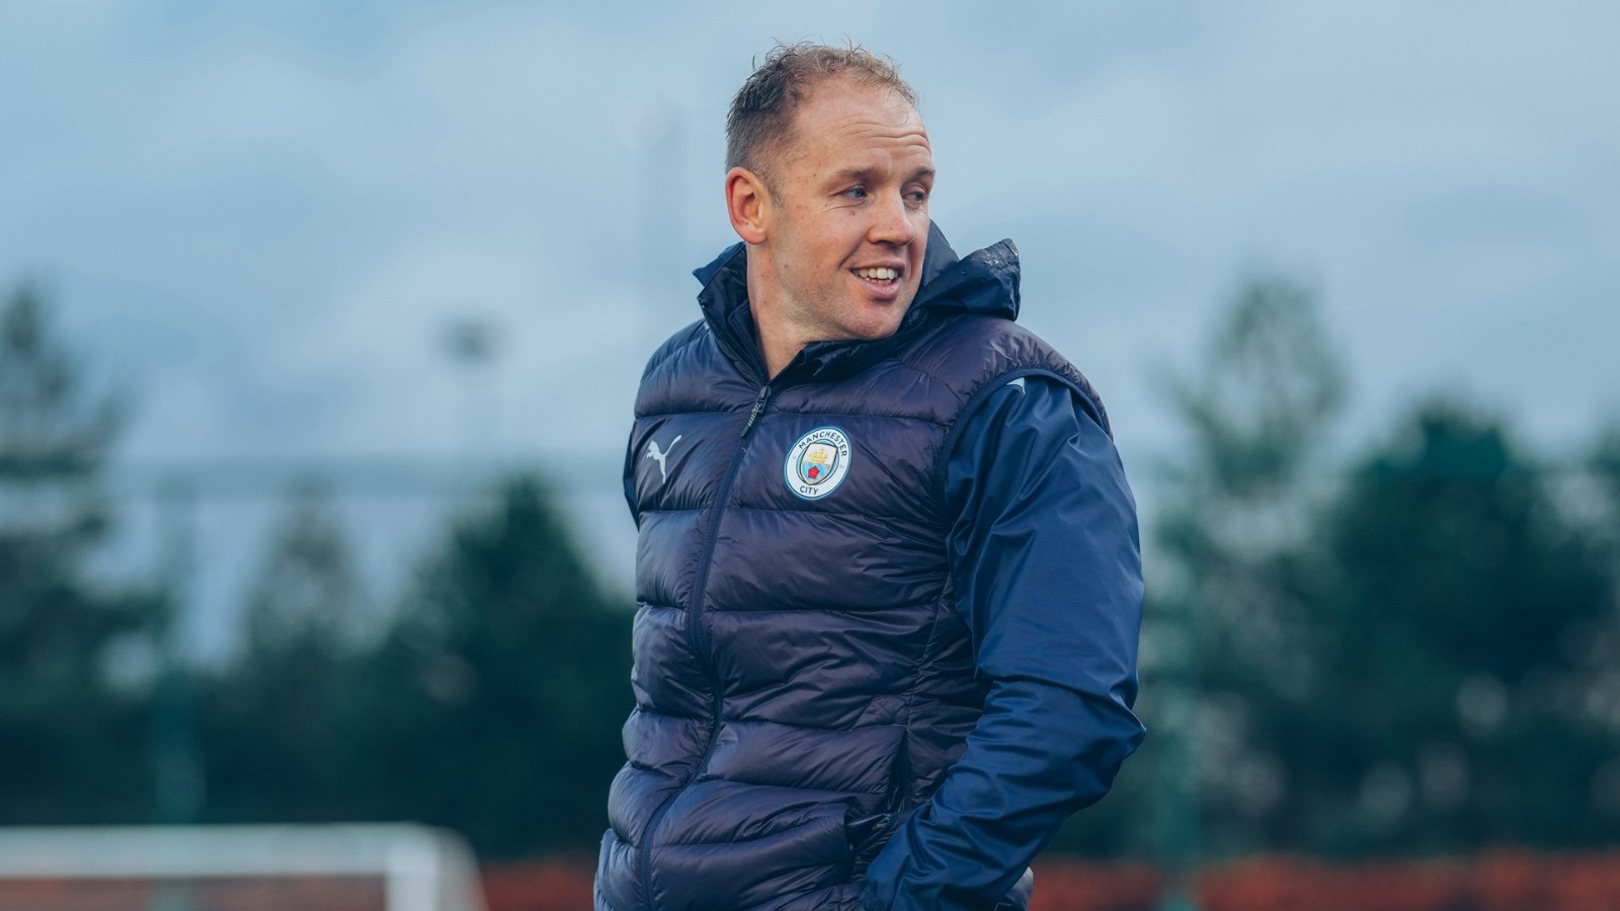 Wilkinson urges City to maintain focus as Under-18s title race hots up